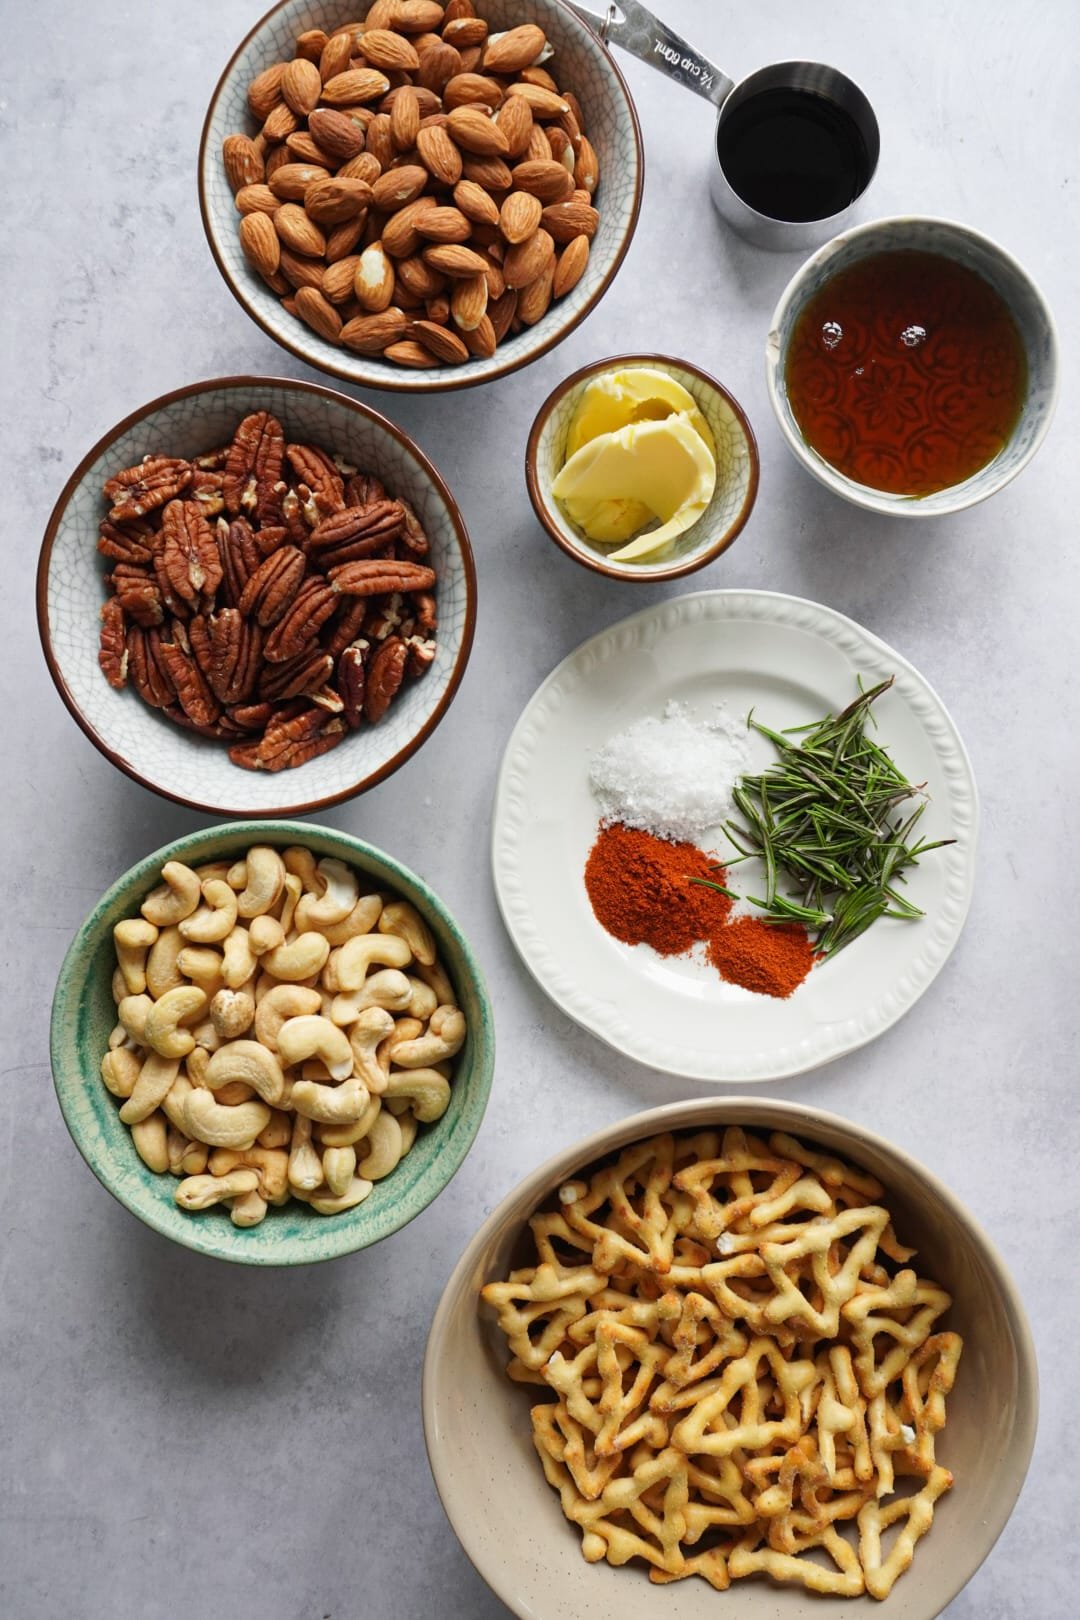 The ingredients you need for Sweet and Savoury Spiced Nuts And Pretzels